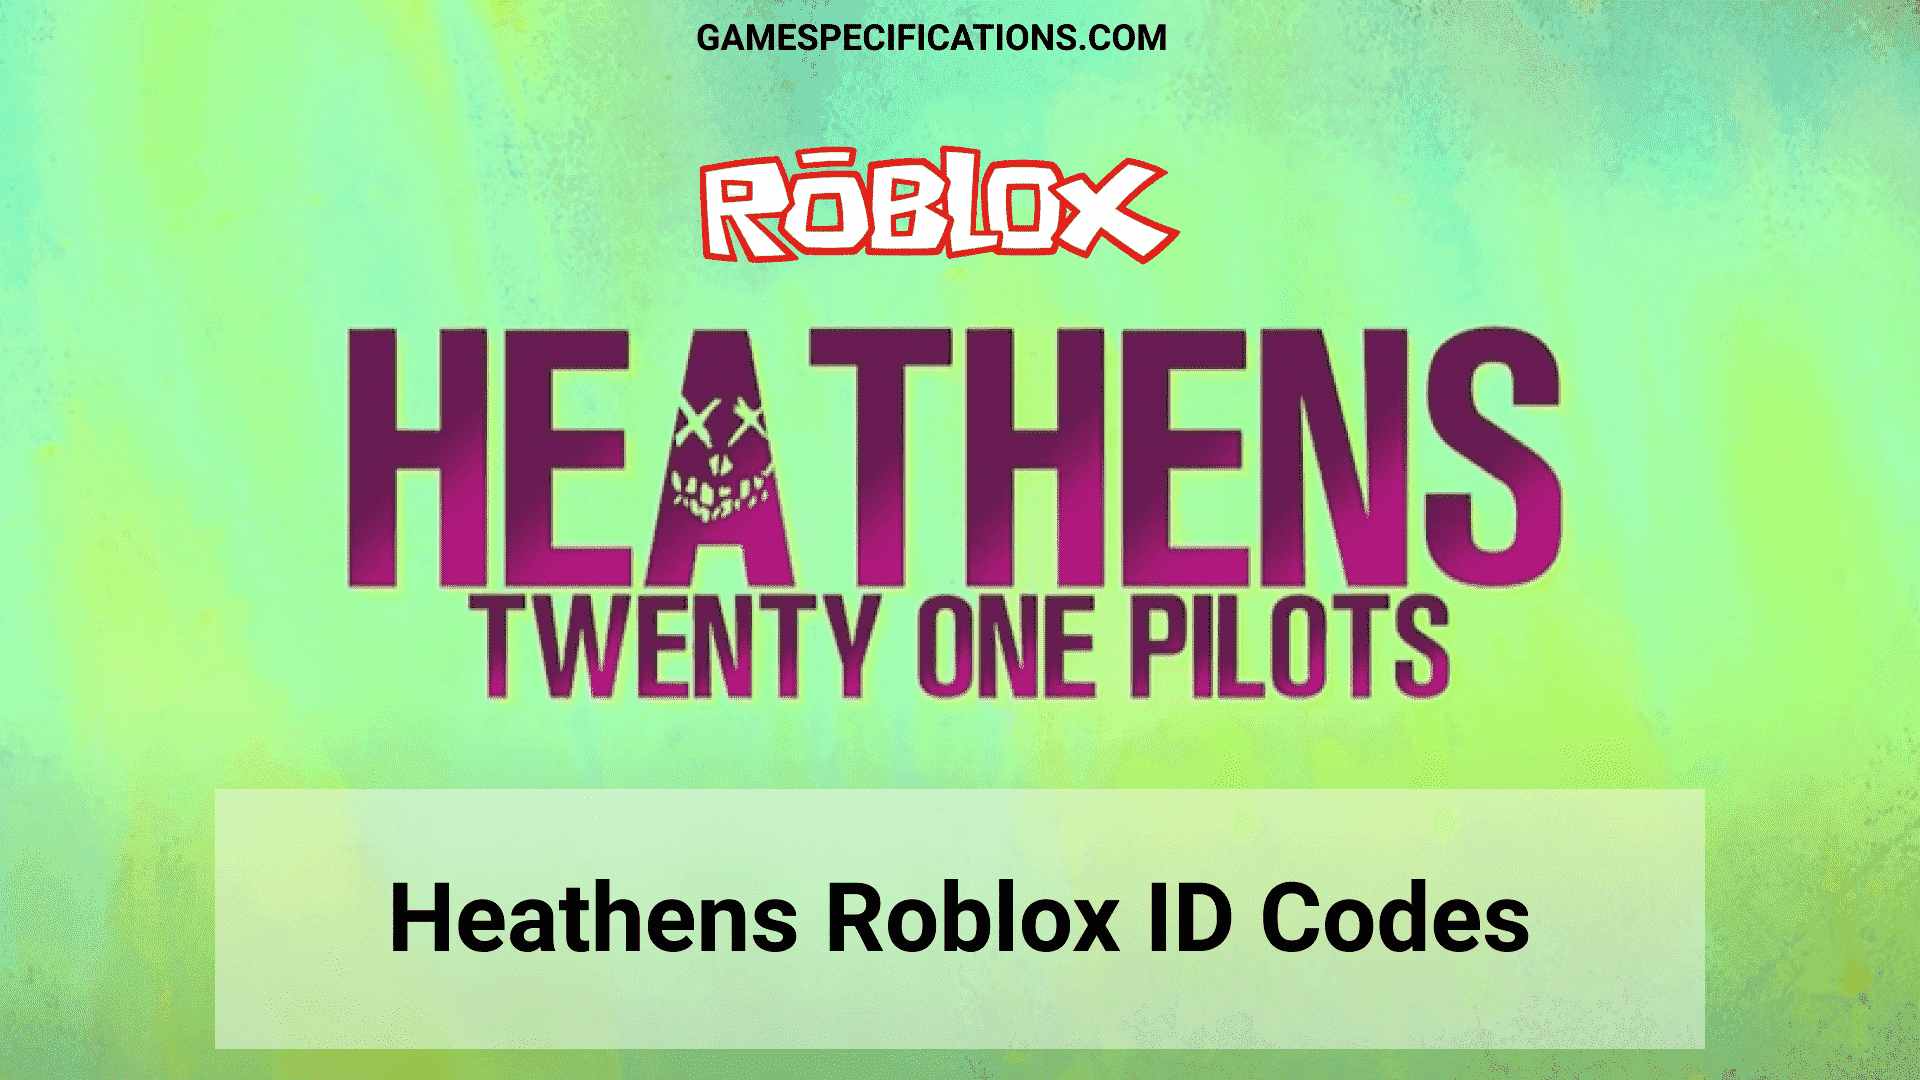 Heathens Roblox Id Codes 2021 Music Codes Game Specifications - fnaf roblox radio codes